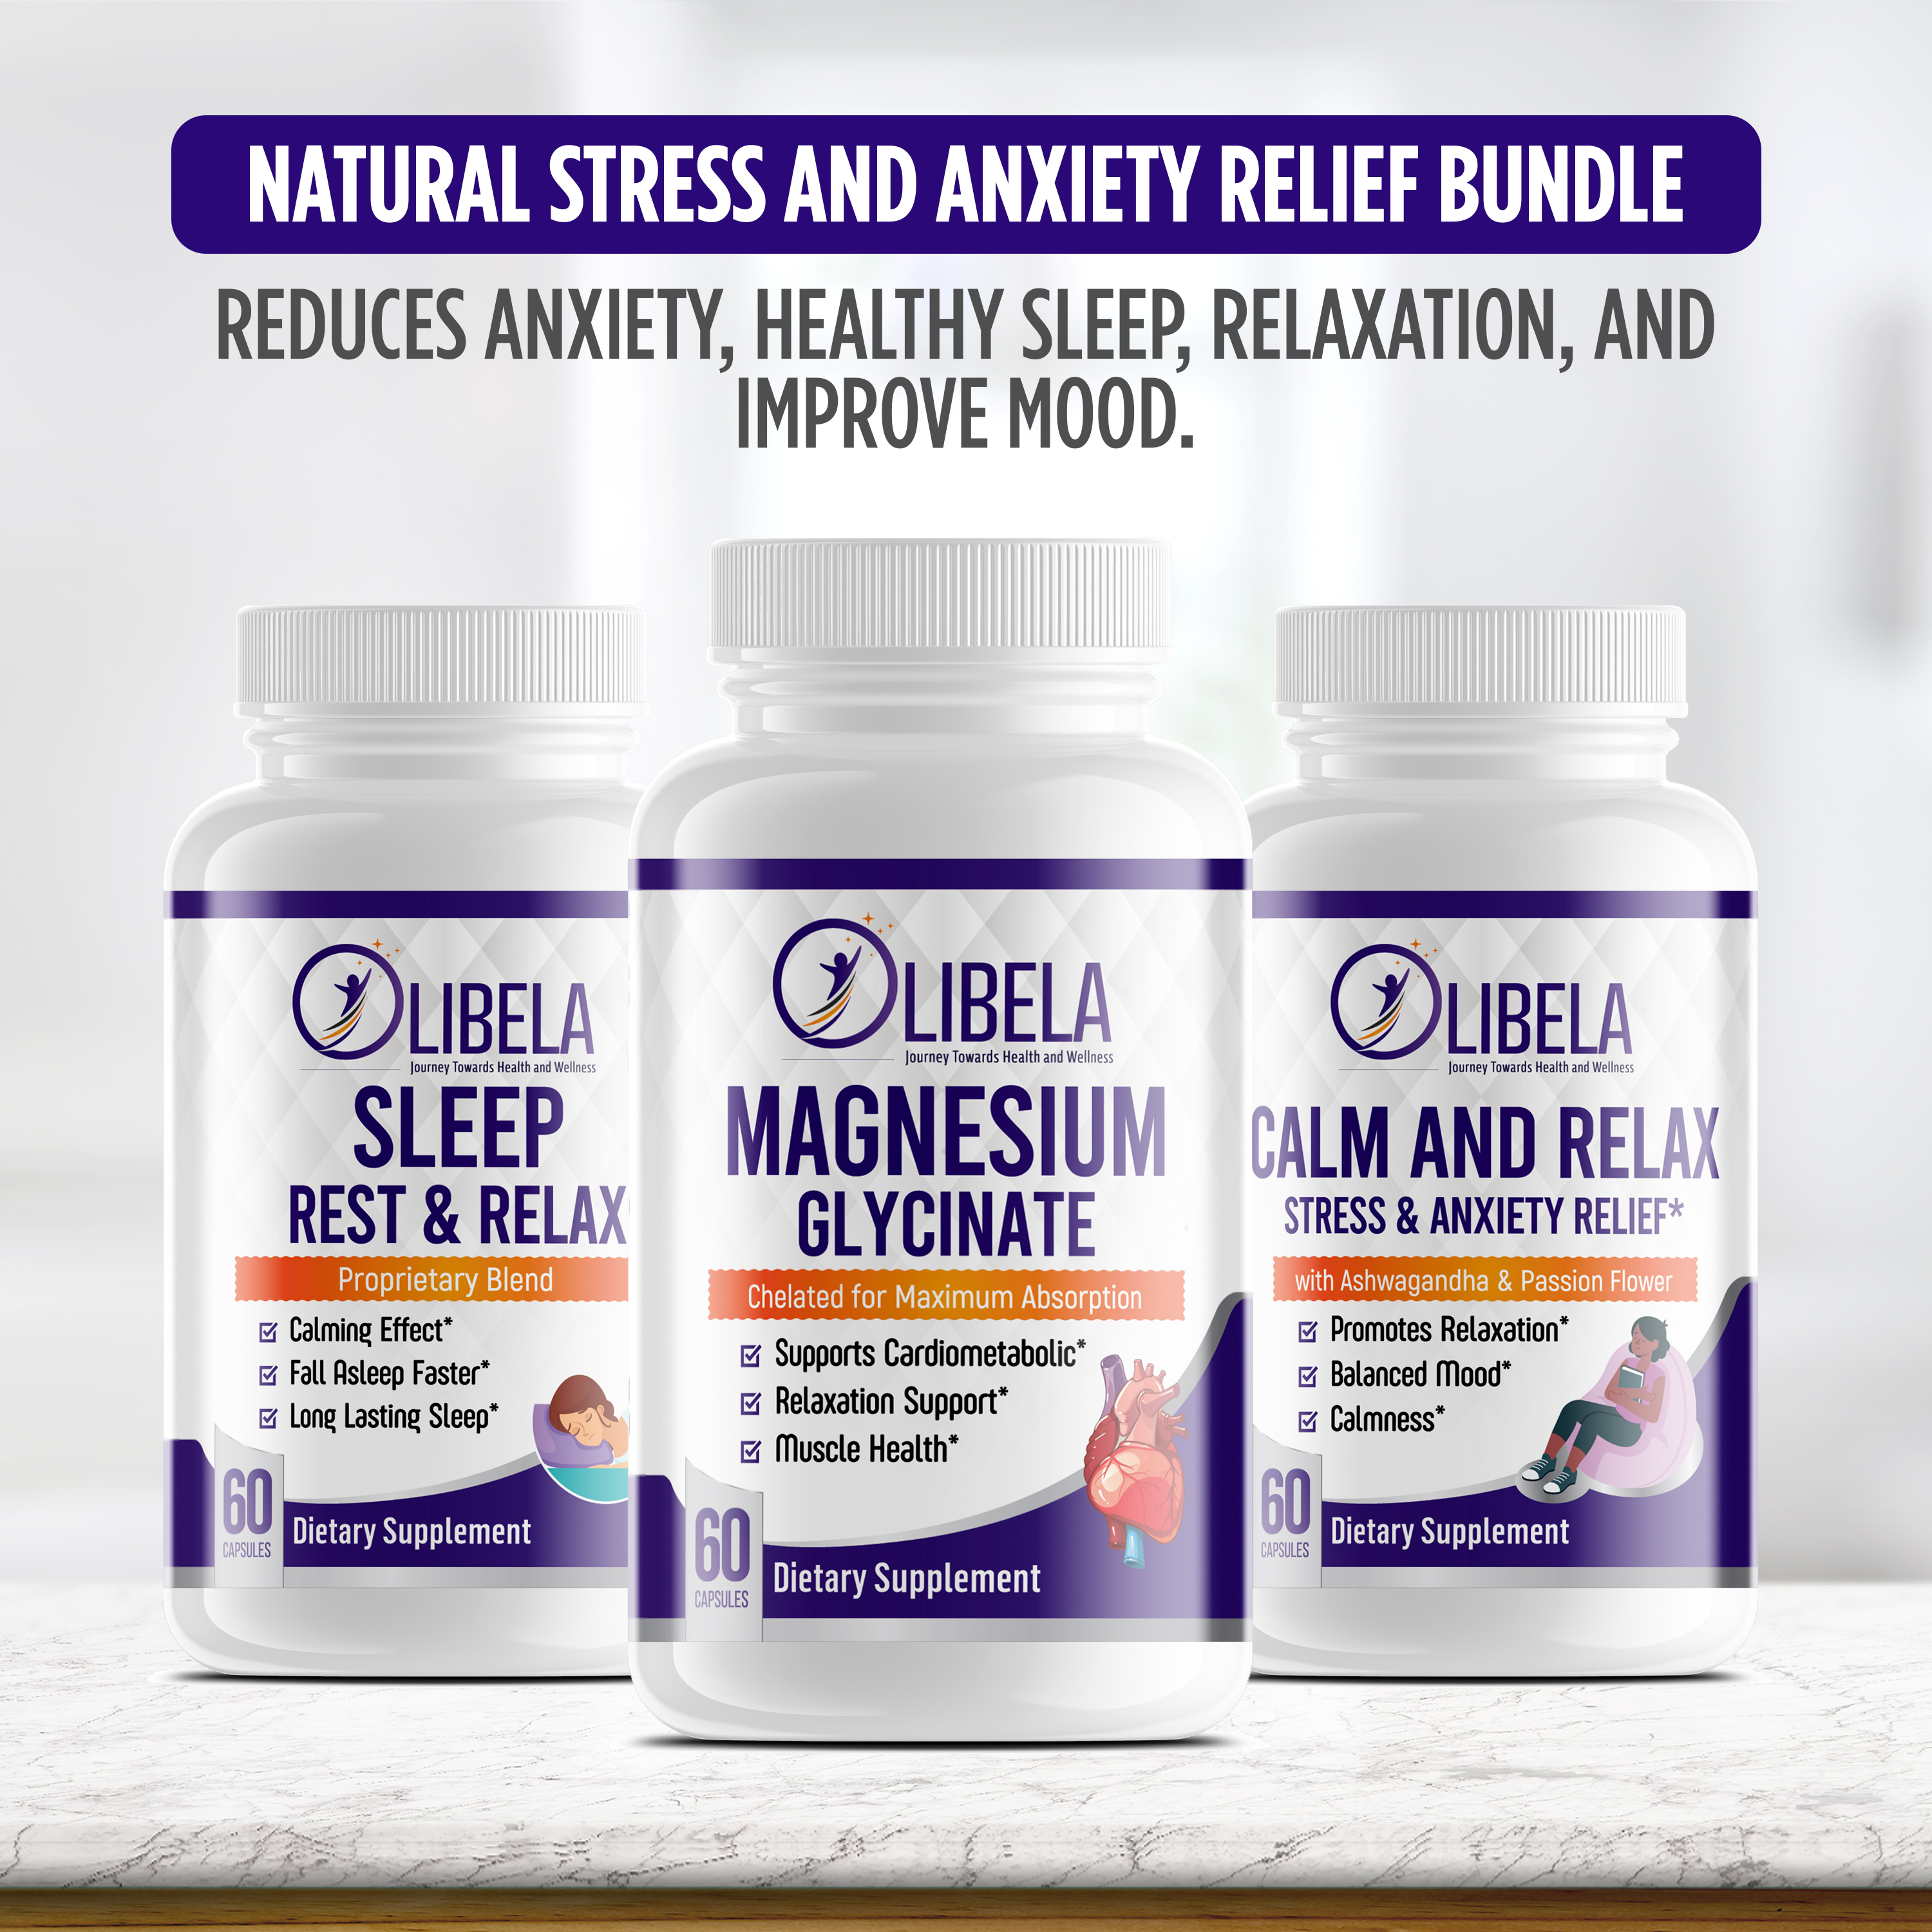 Natural Stress and Anxiety Relief Bundle - Reduces Anxiety, Healthy Sleep, Relaxation, and Improve Mood.